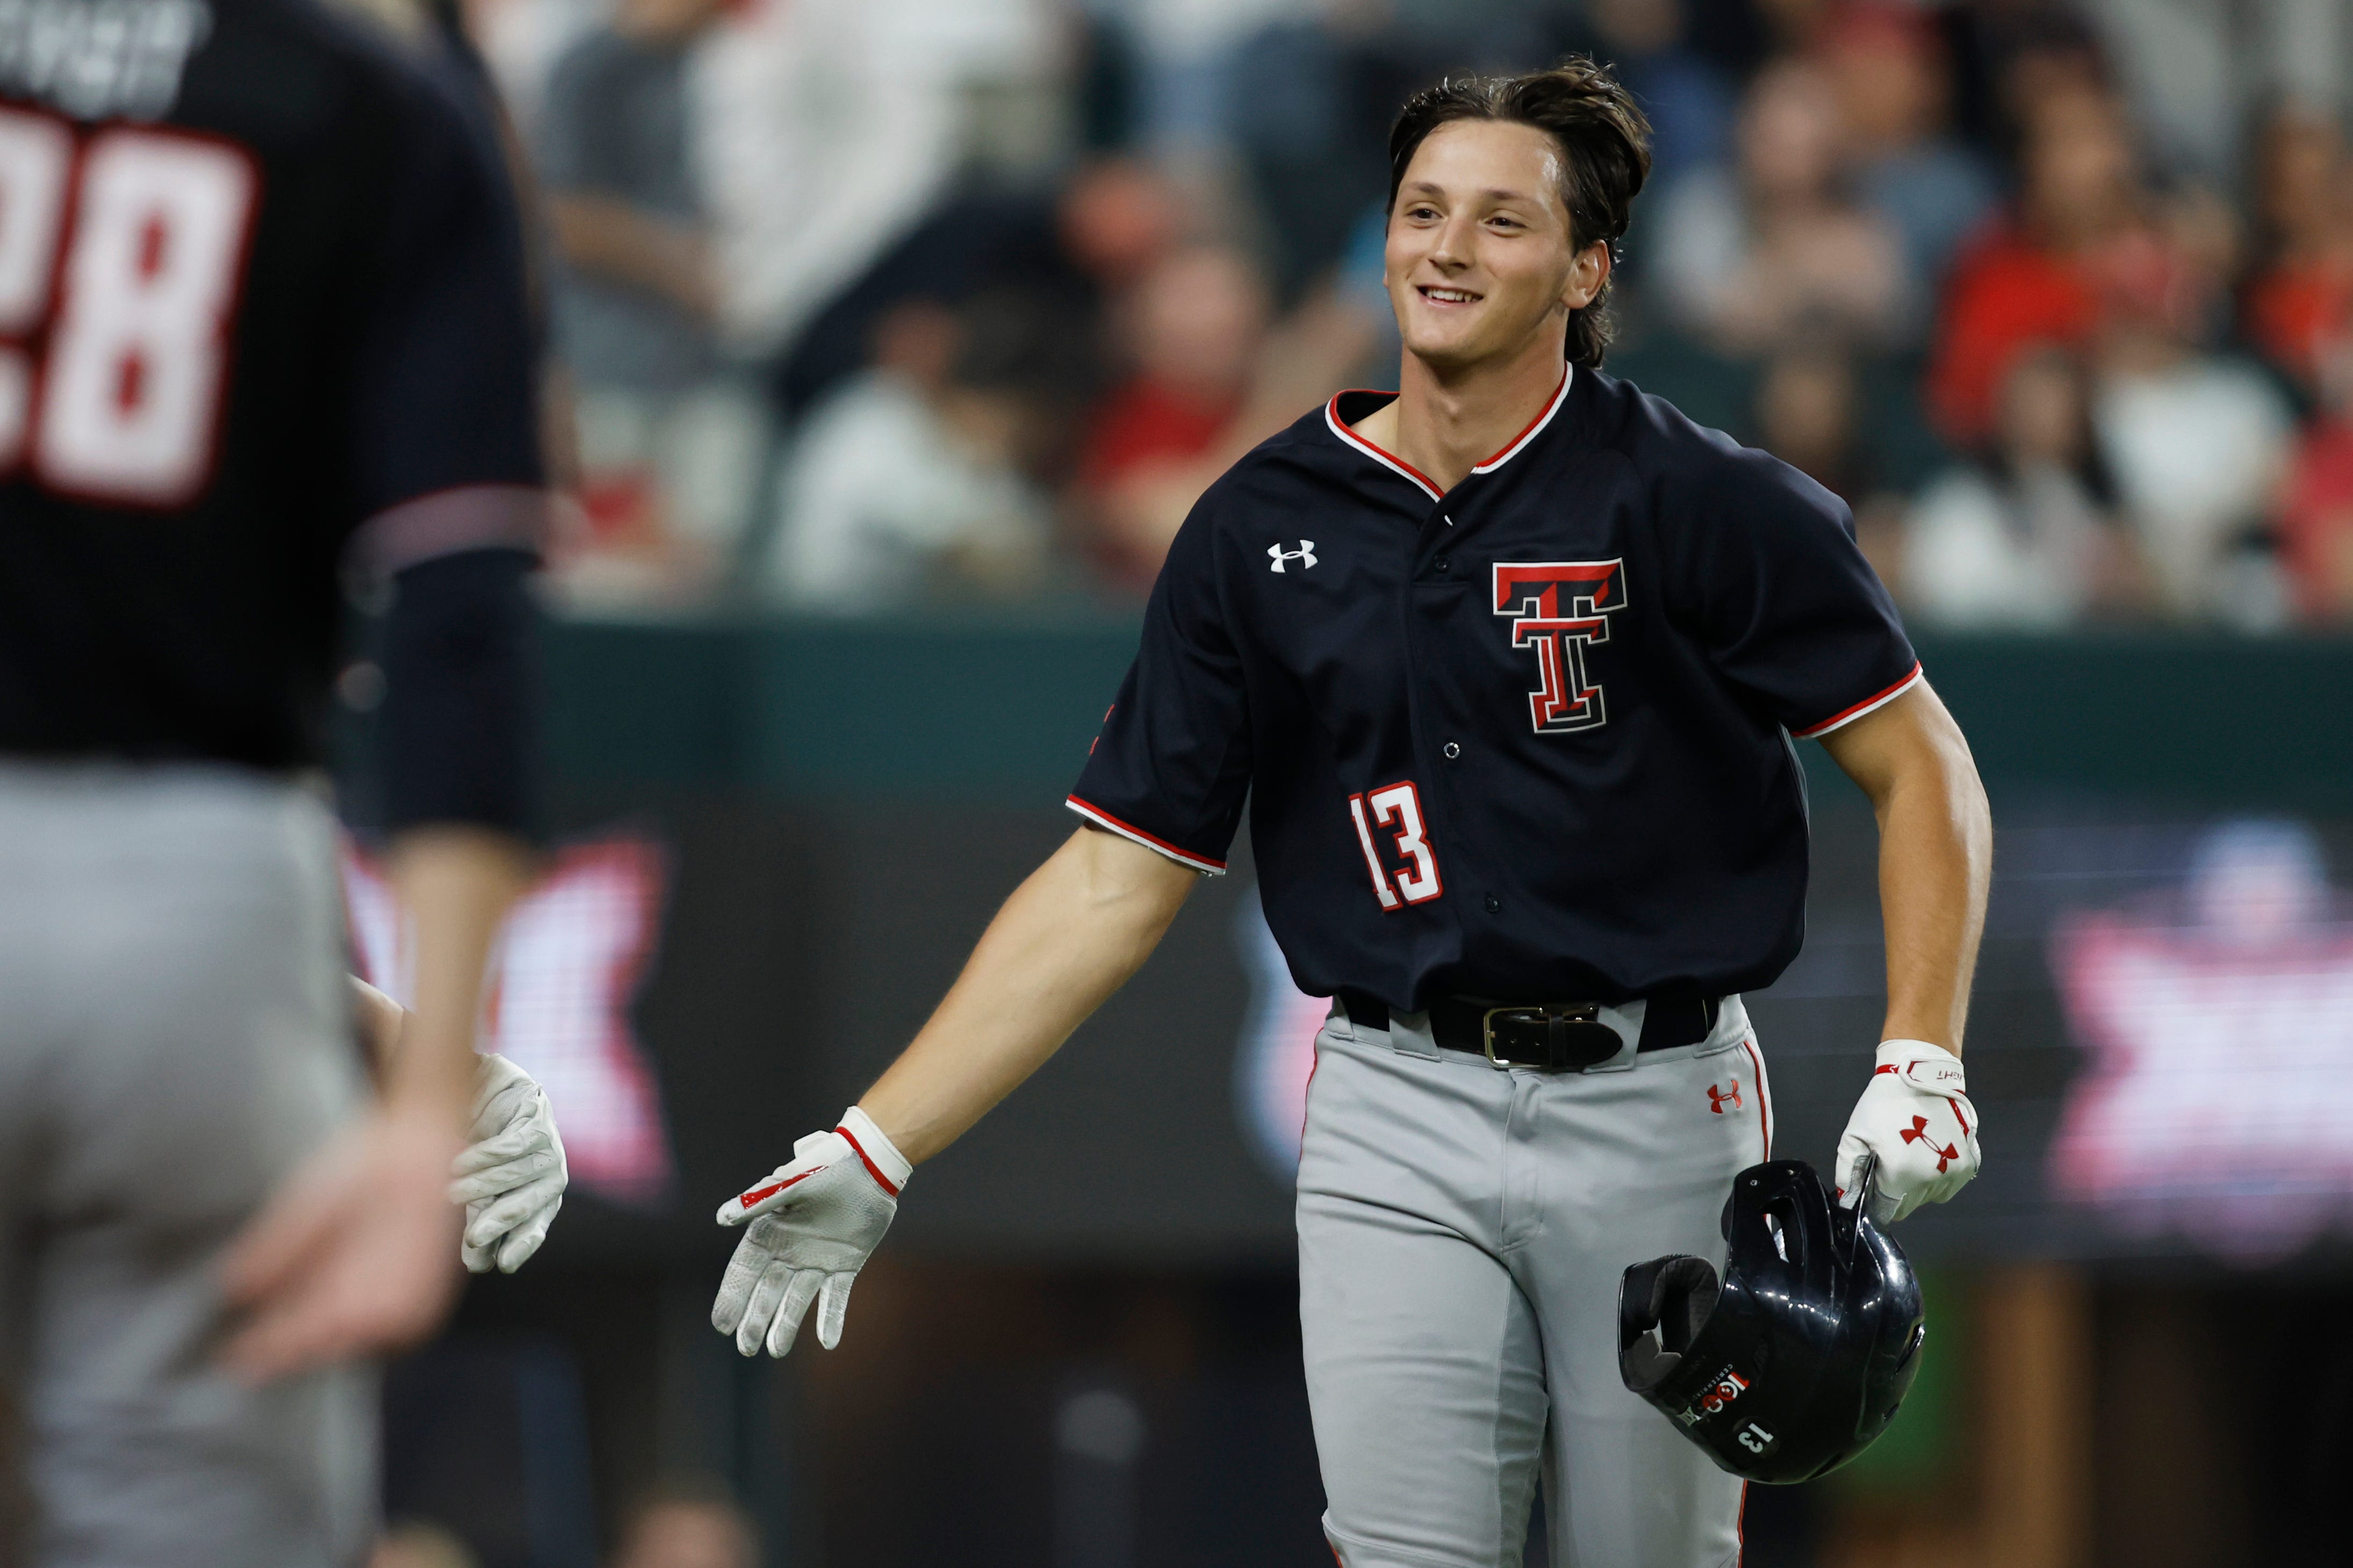 Preview, how to watch Texas Tech baseball vs. UT in Big 12 tournament